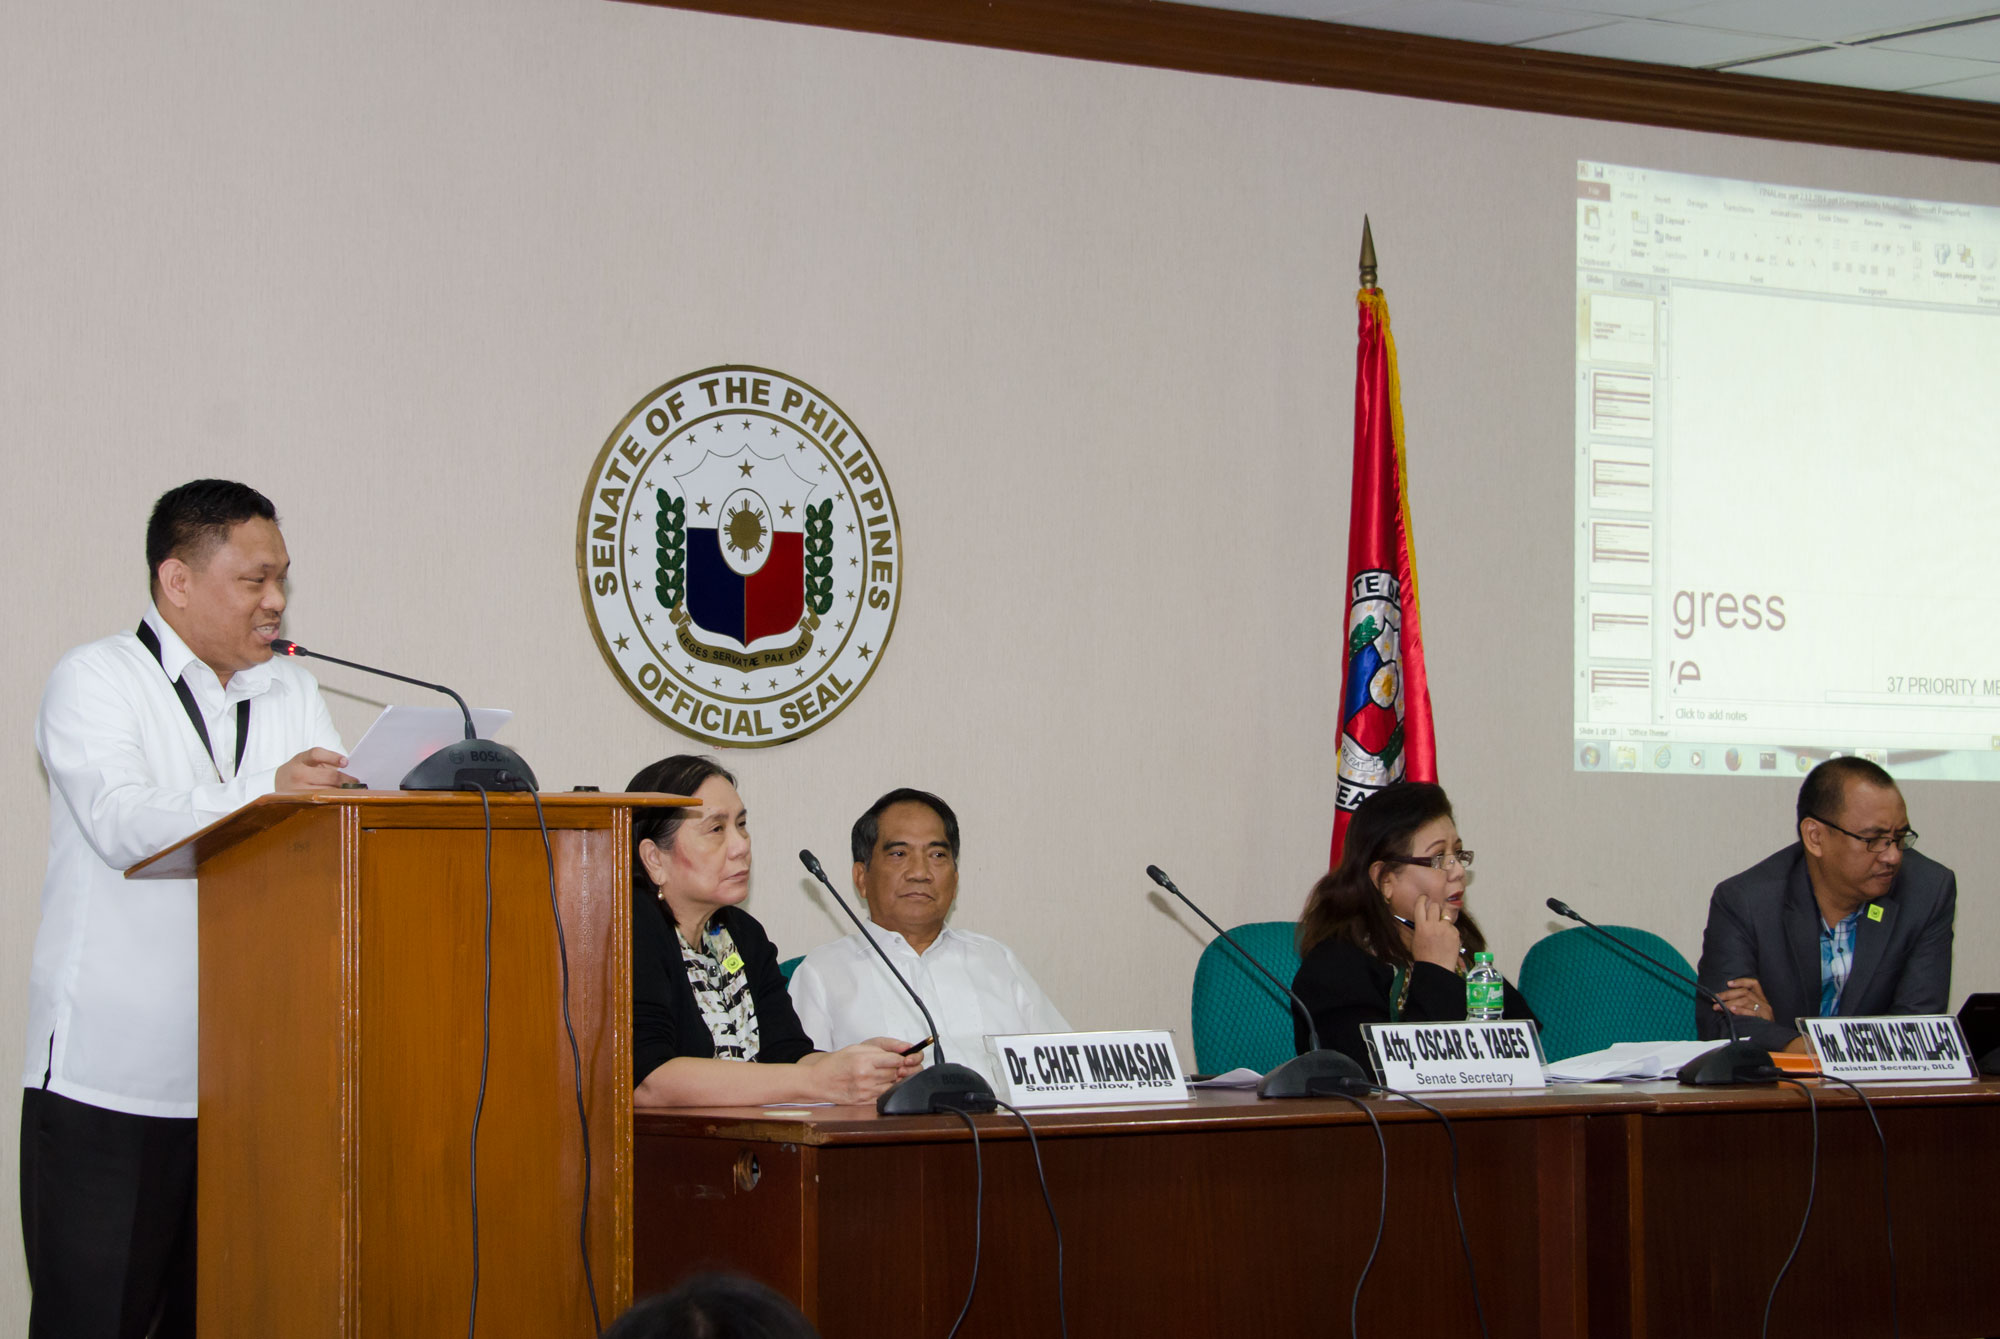 Senate Centennial Lecture Series “Assessment of the Bottom-up Budgeting Process for FY 2015-ggm_7850.jpg